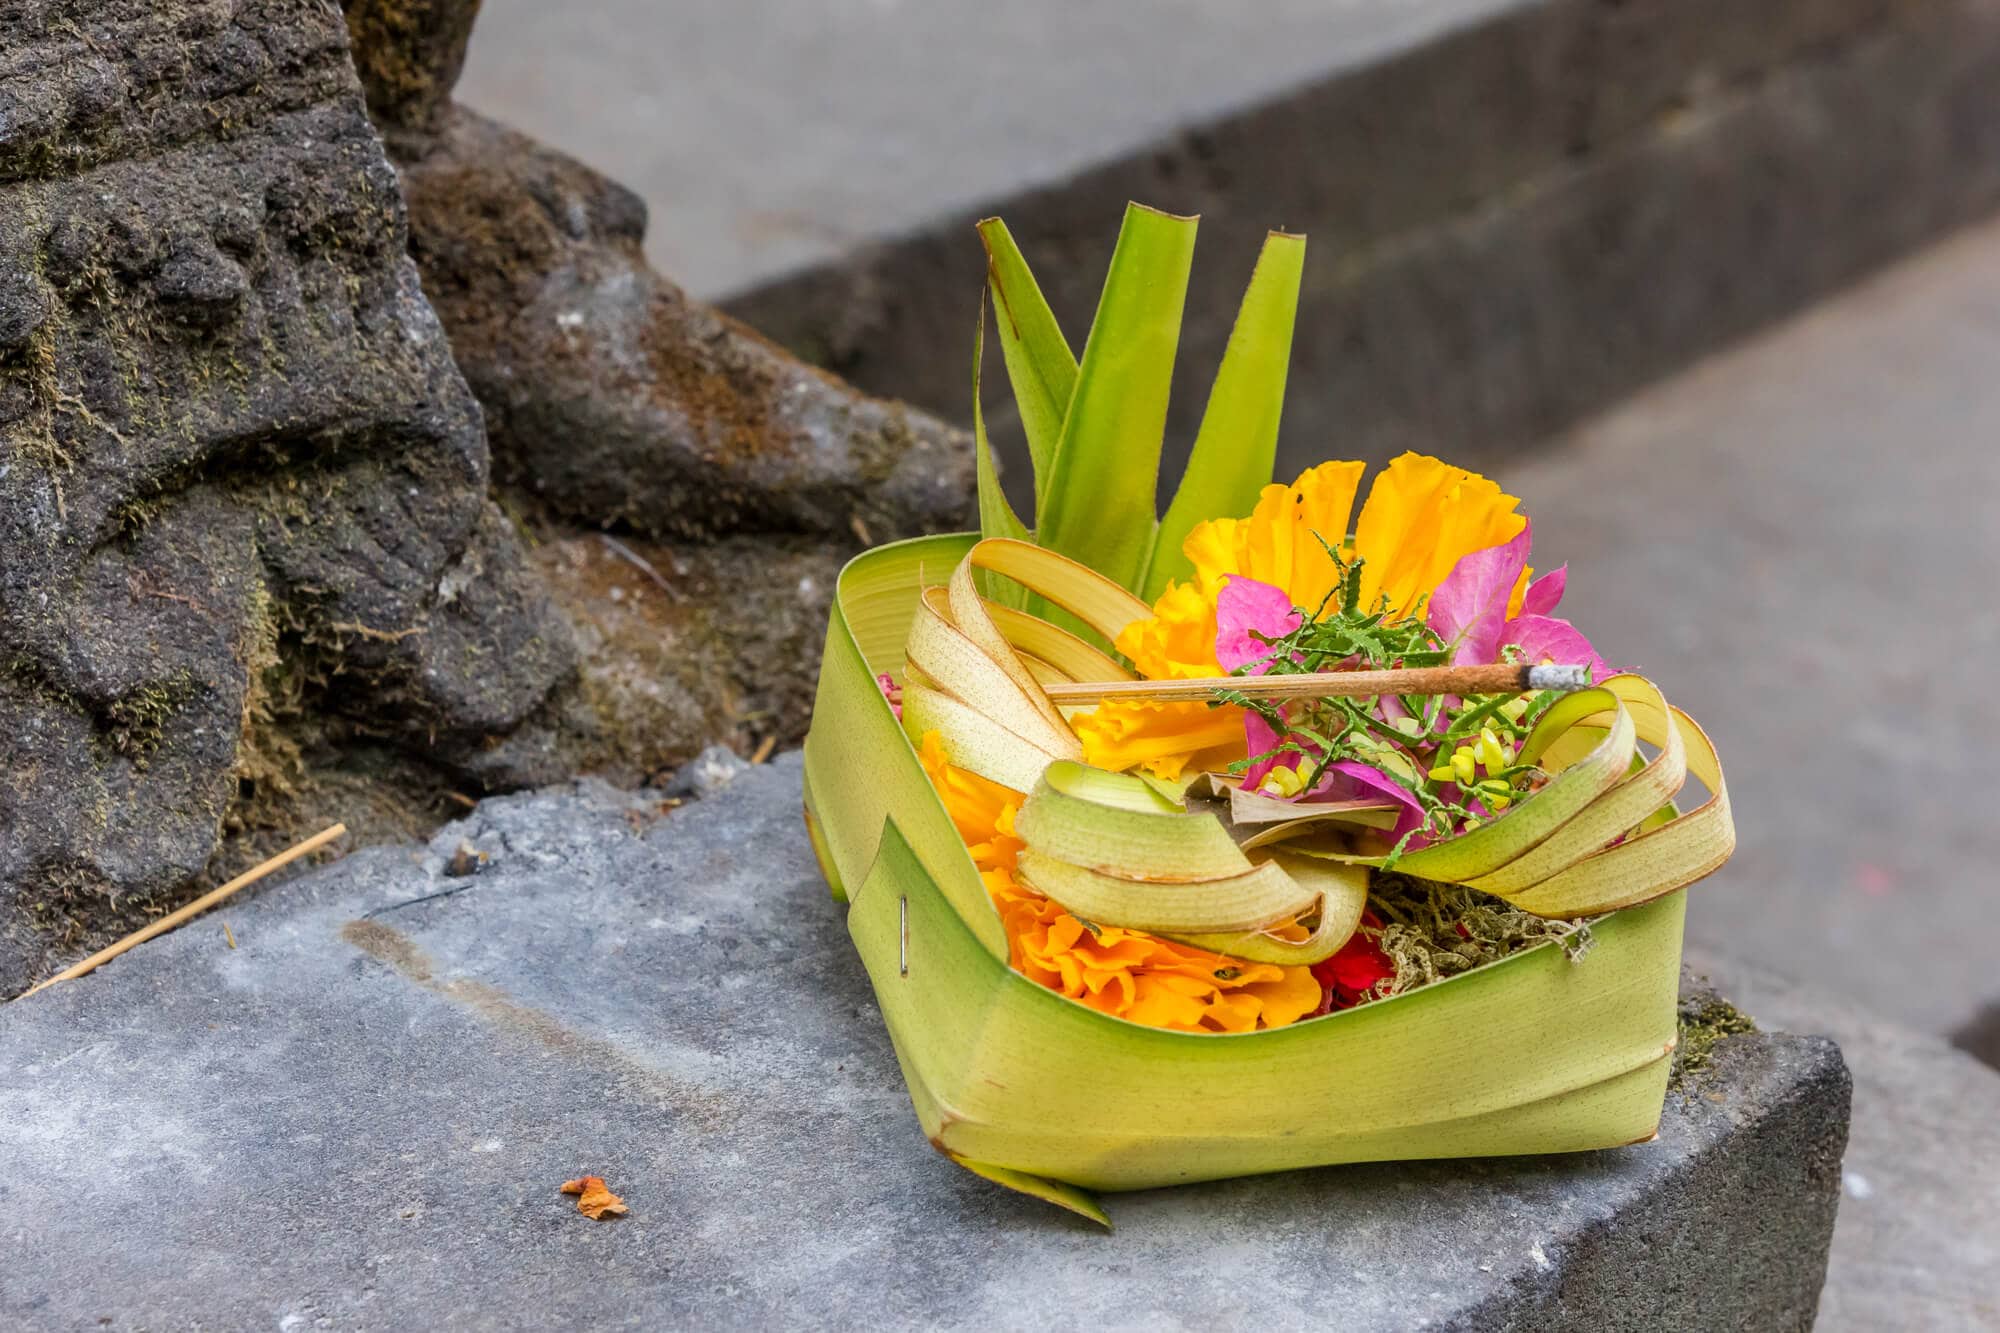 Do not step on or disturb the offerings in Bali